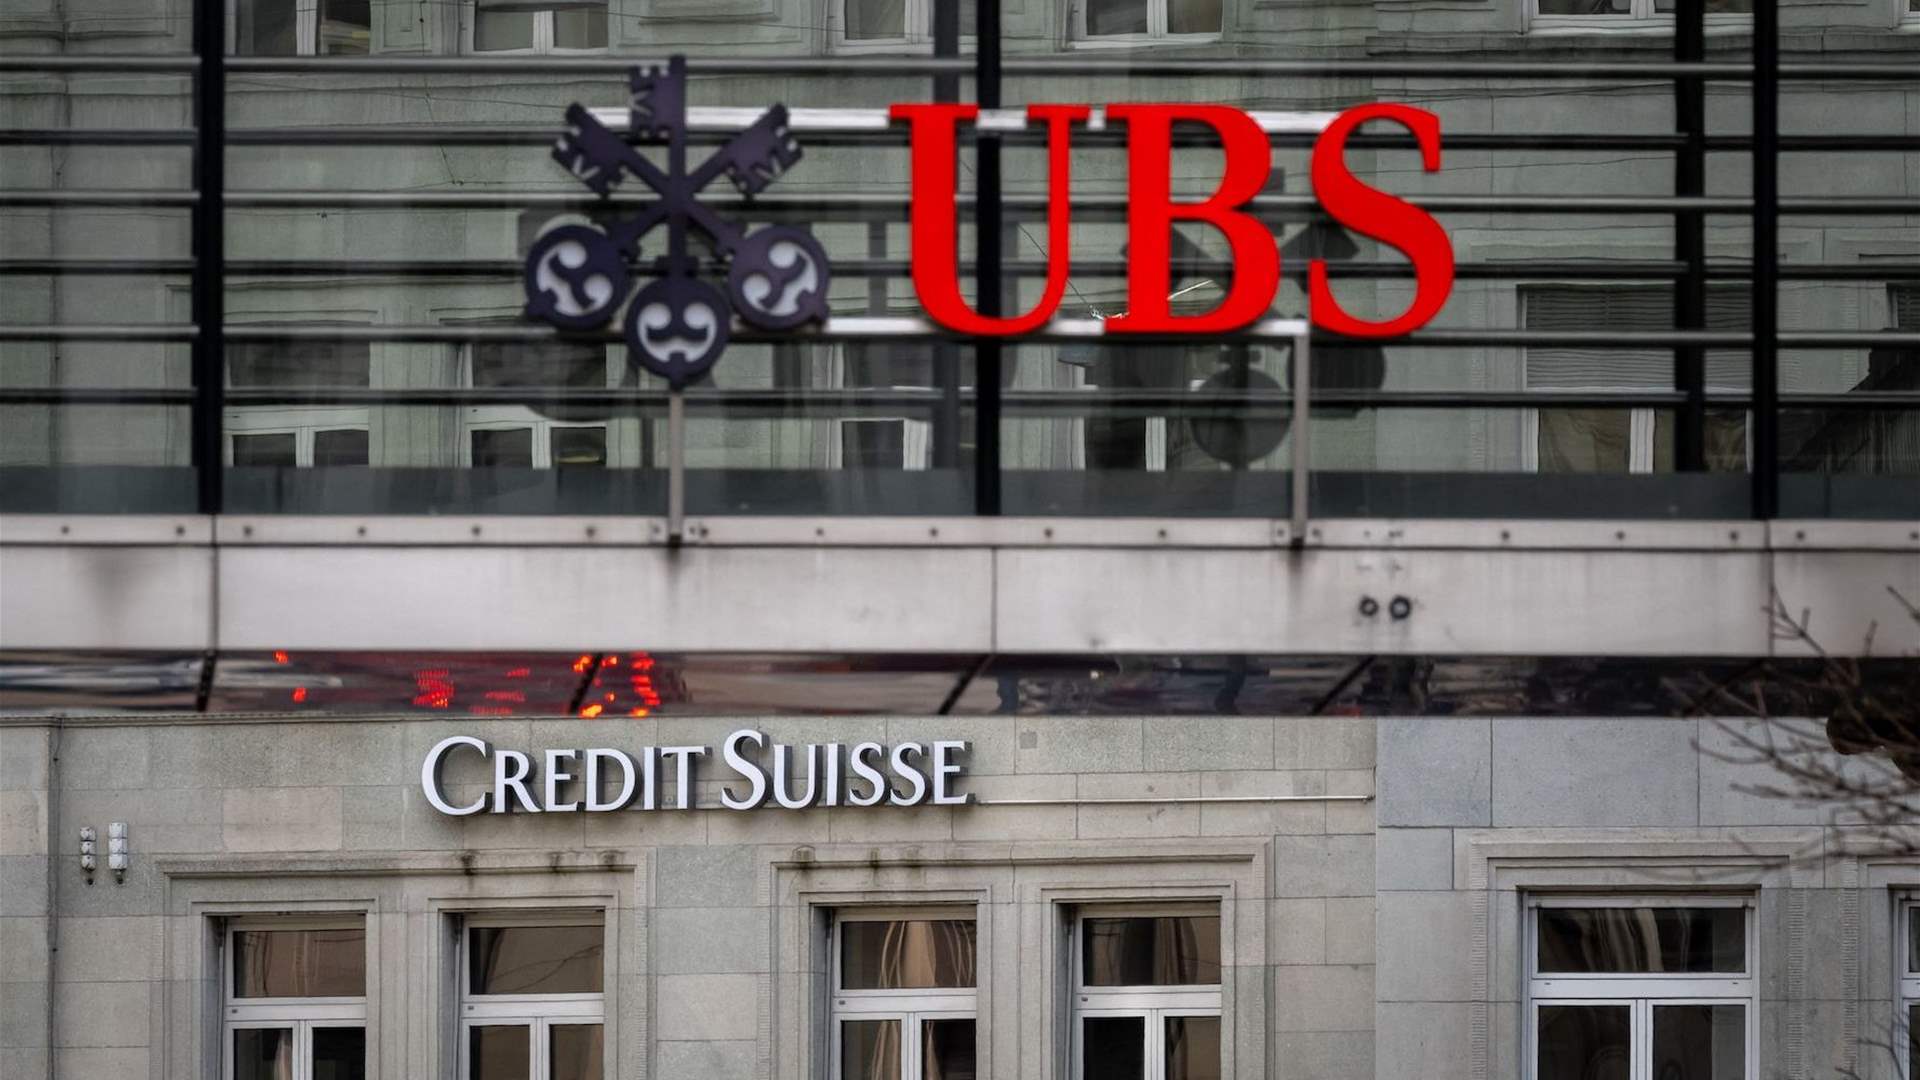 Credit Suisse takeover hits heart of Swiss banking, identity